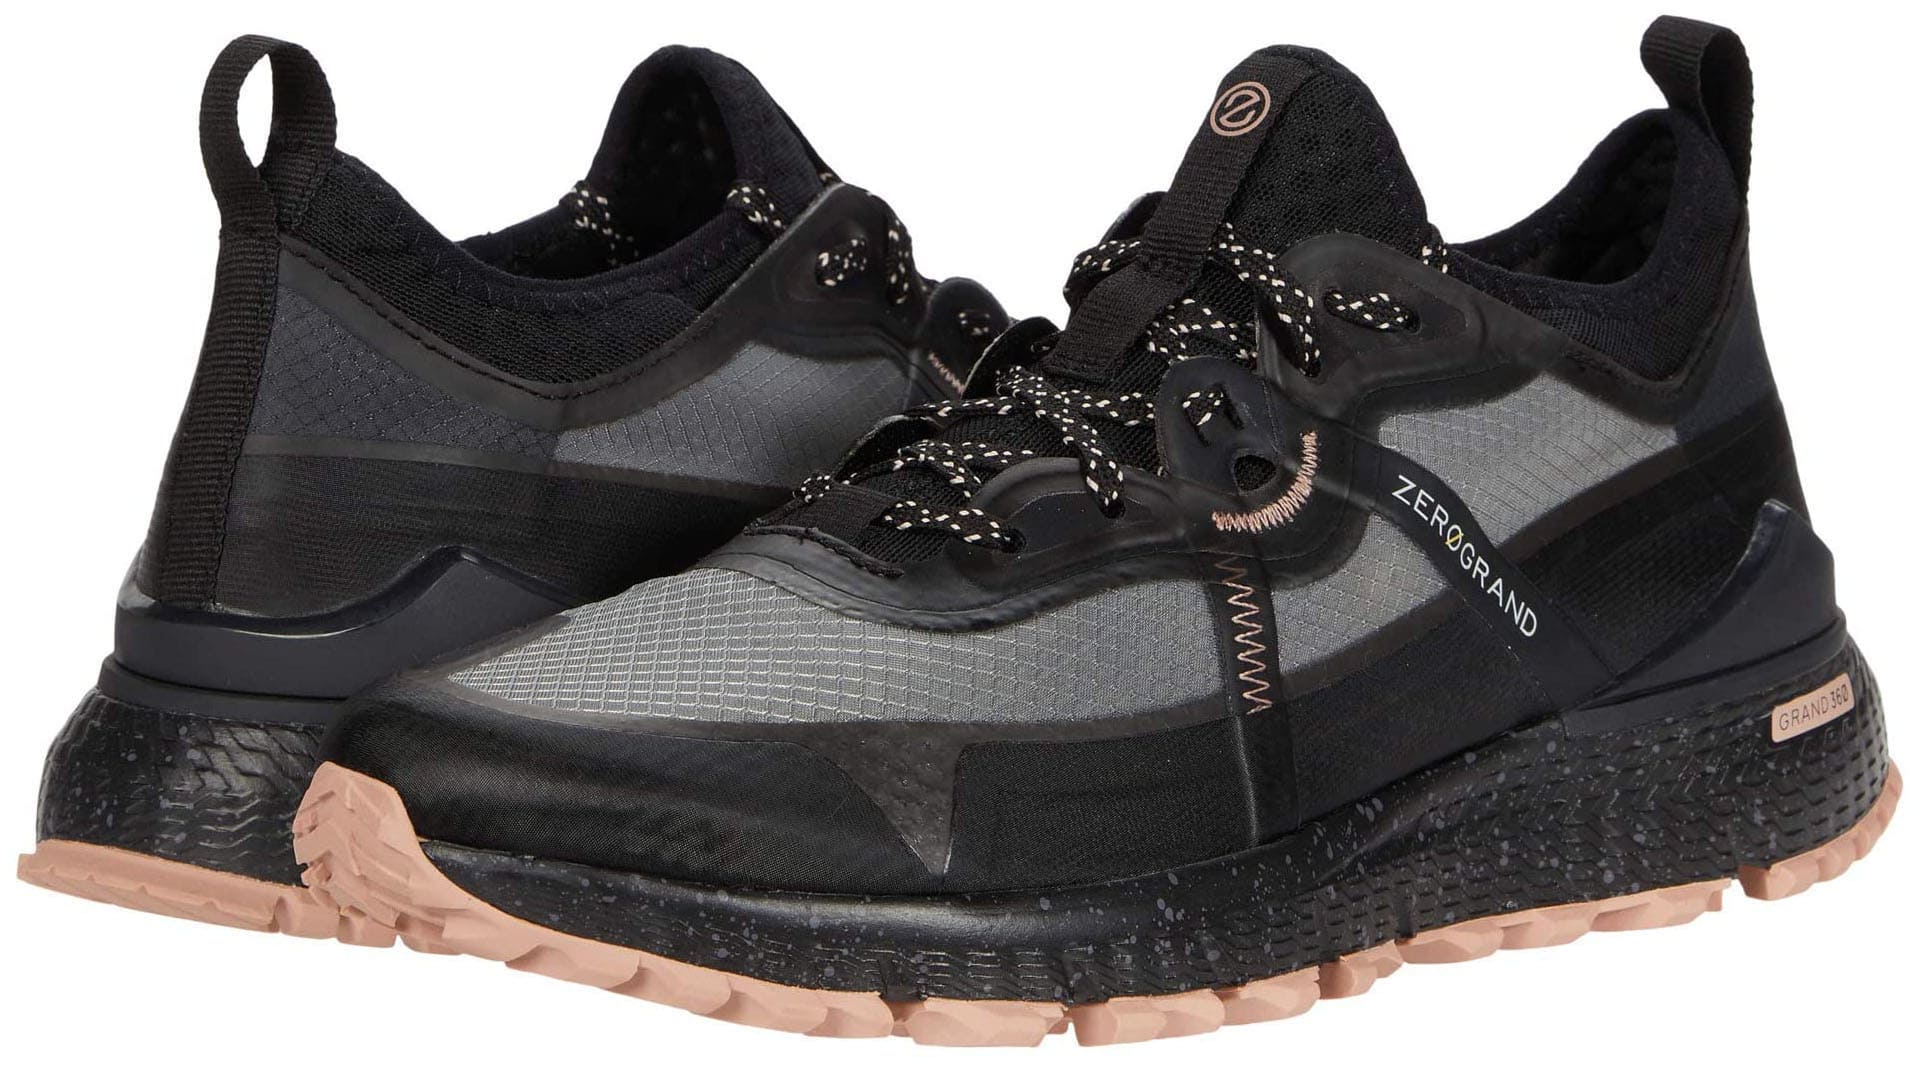 Cole Haan's all terrain ZeroGrand Overtake also comes in black and misty rose colorway